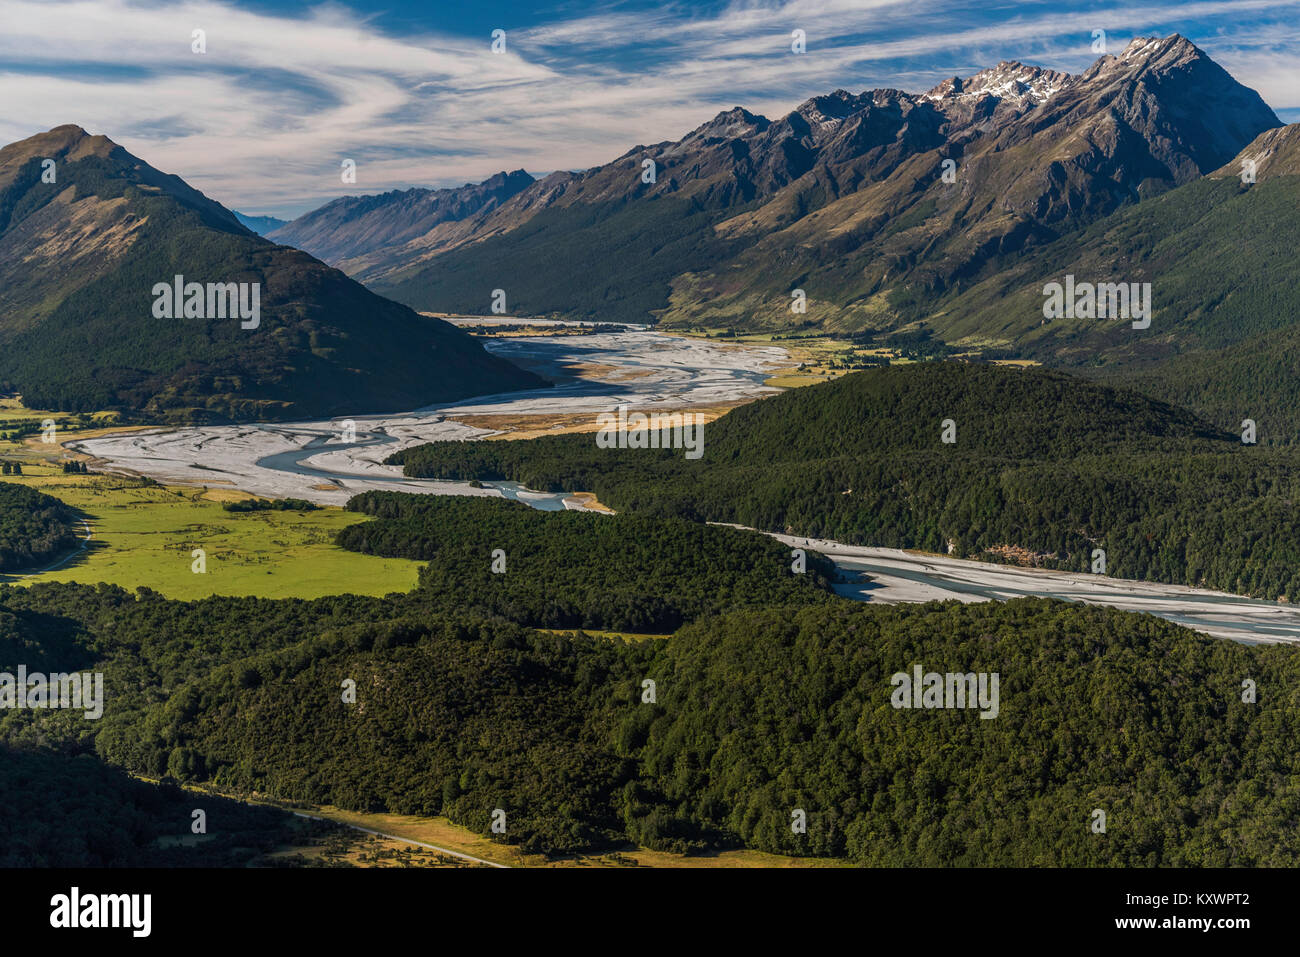 Dart river, movie location for Lord of the rings, Otago New Zealand Stock Photo